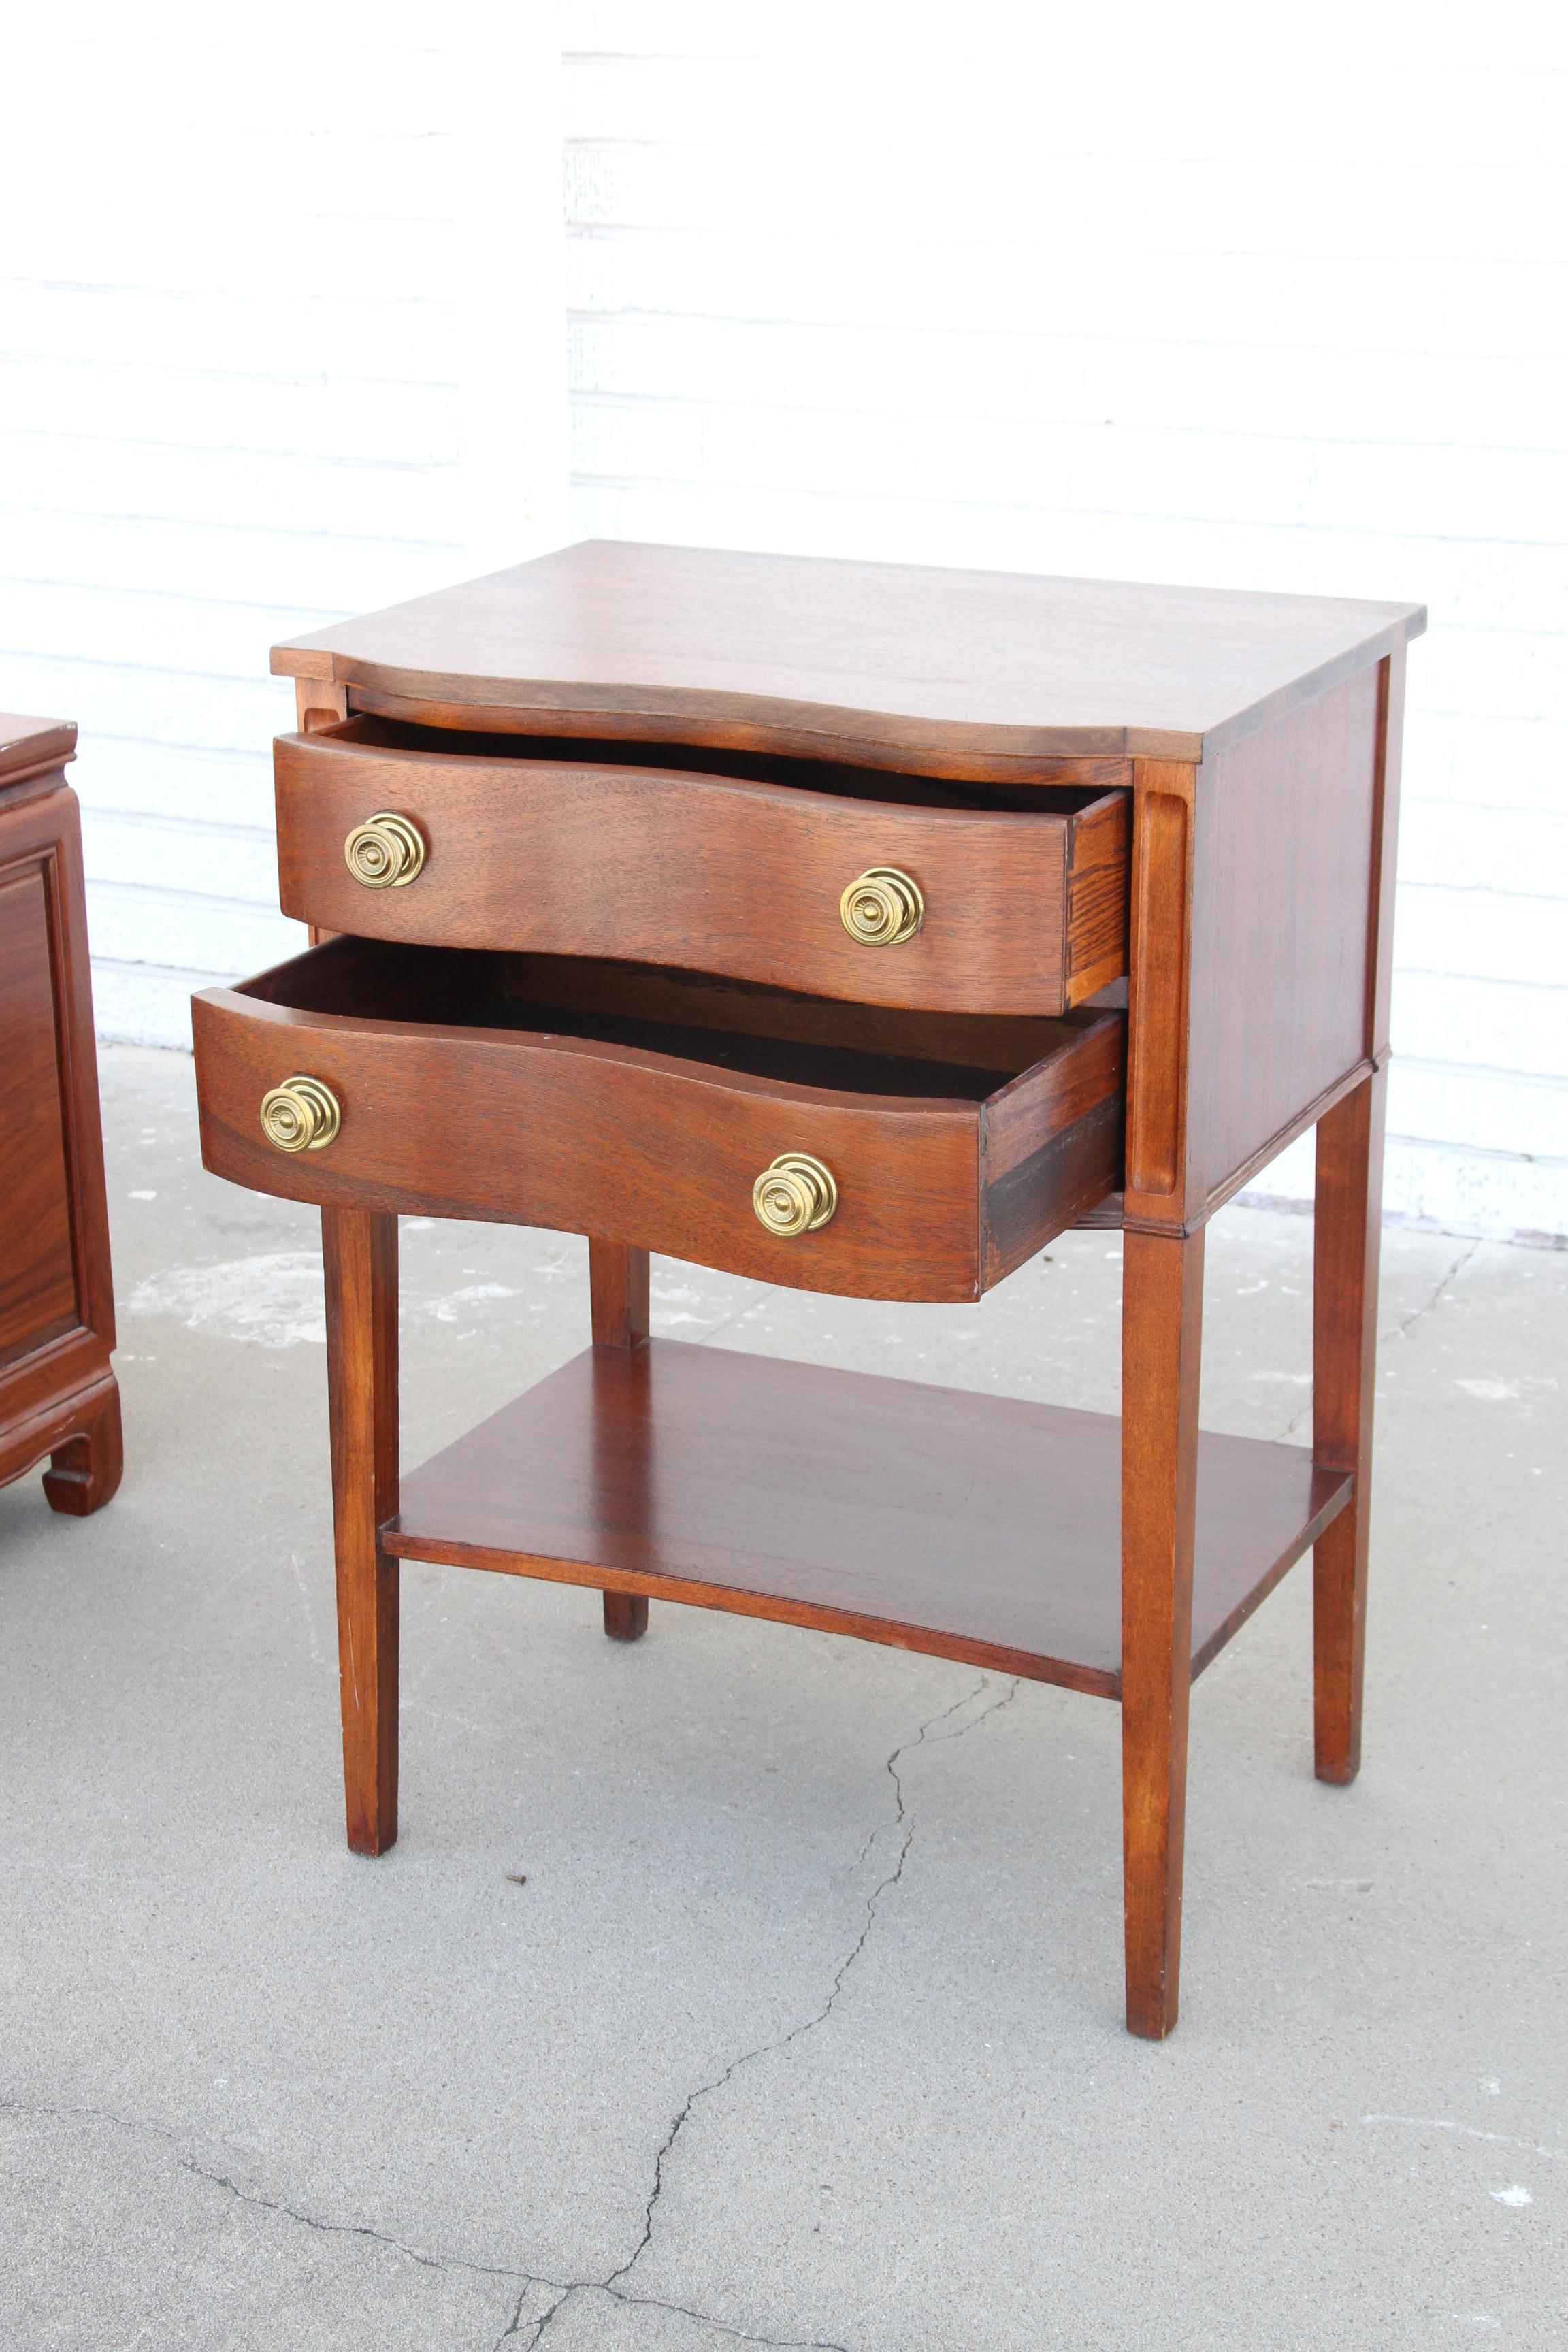 One Chippendale Mahogany Serpentine Front 2-Drawer Side Table

Chippendale mahogany serpentine front 2-drawer side table.  Brass pulls. Open shelf below. Very good condition.
 
Height: 28in 
Width: 20.5in
Depth: 15in